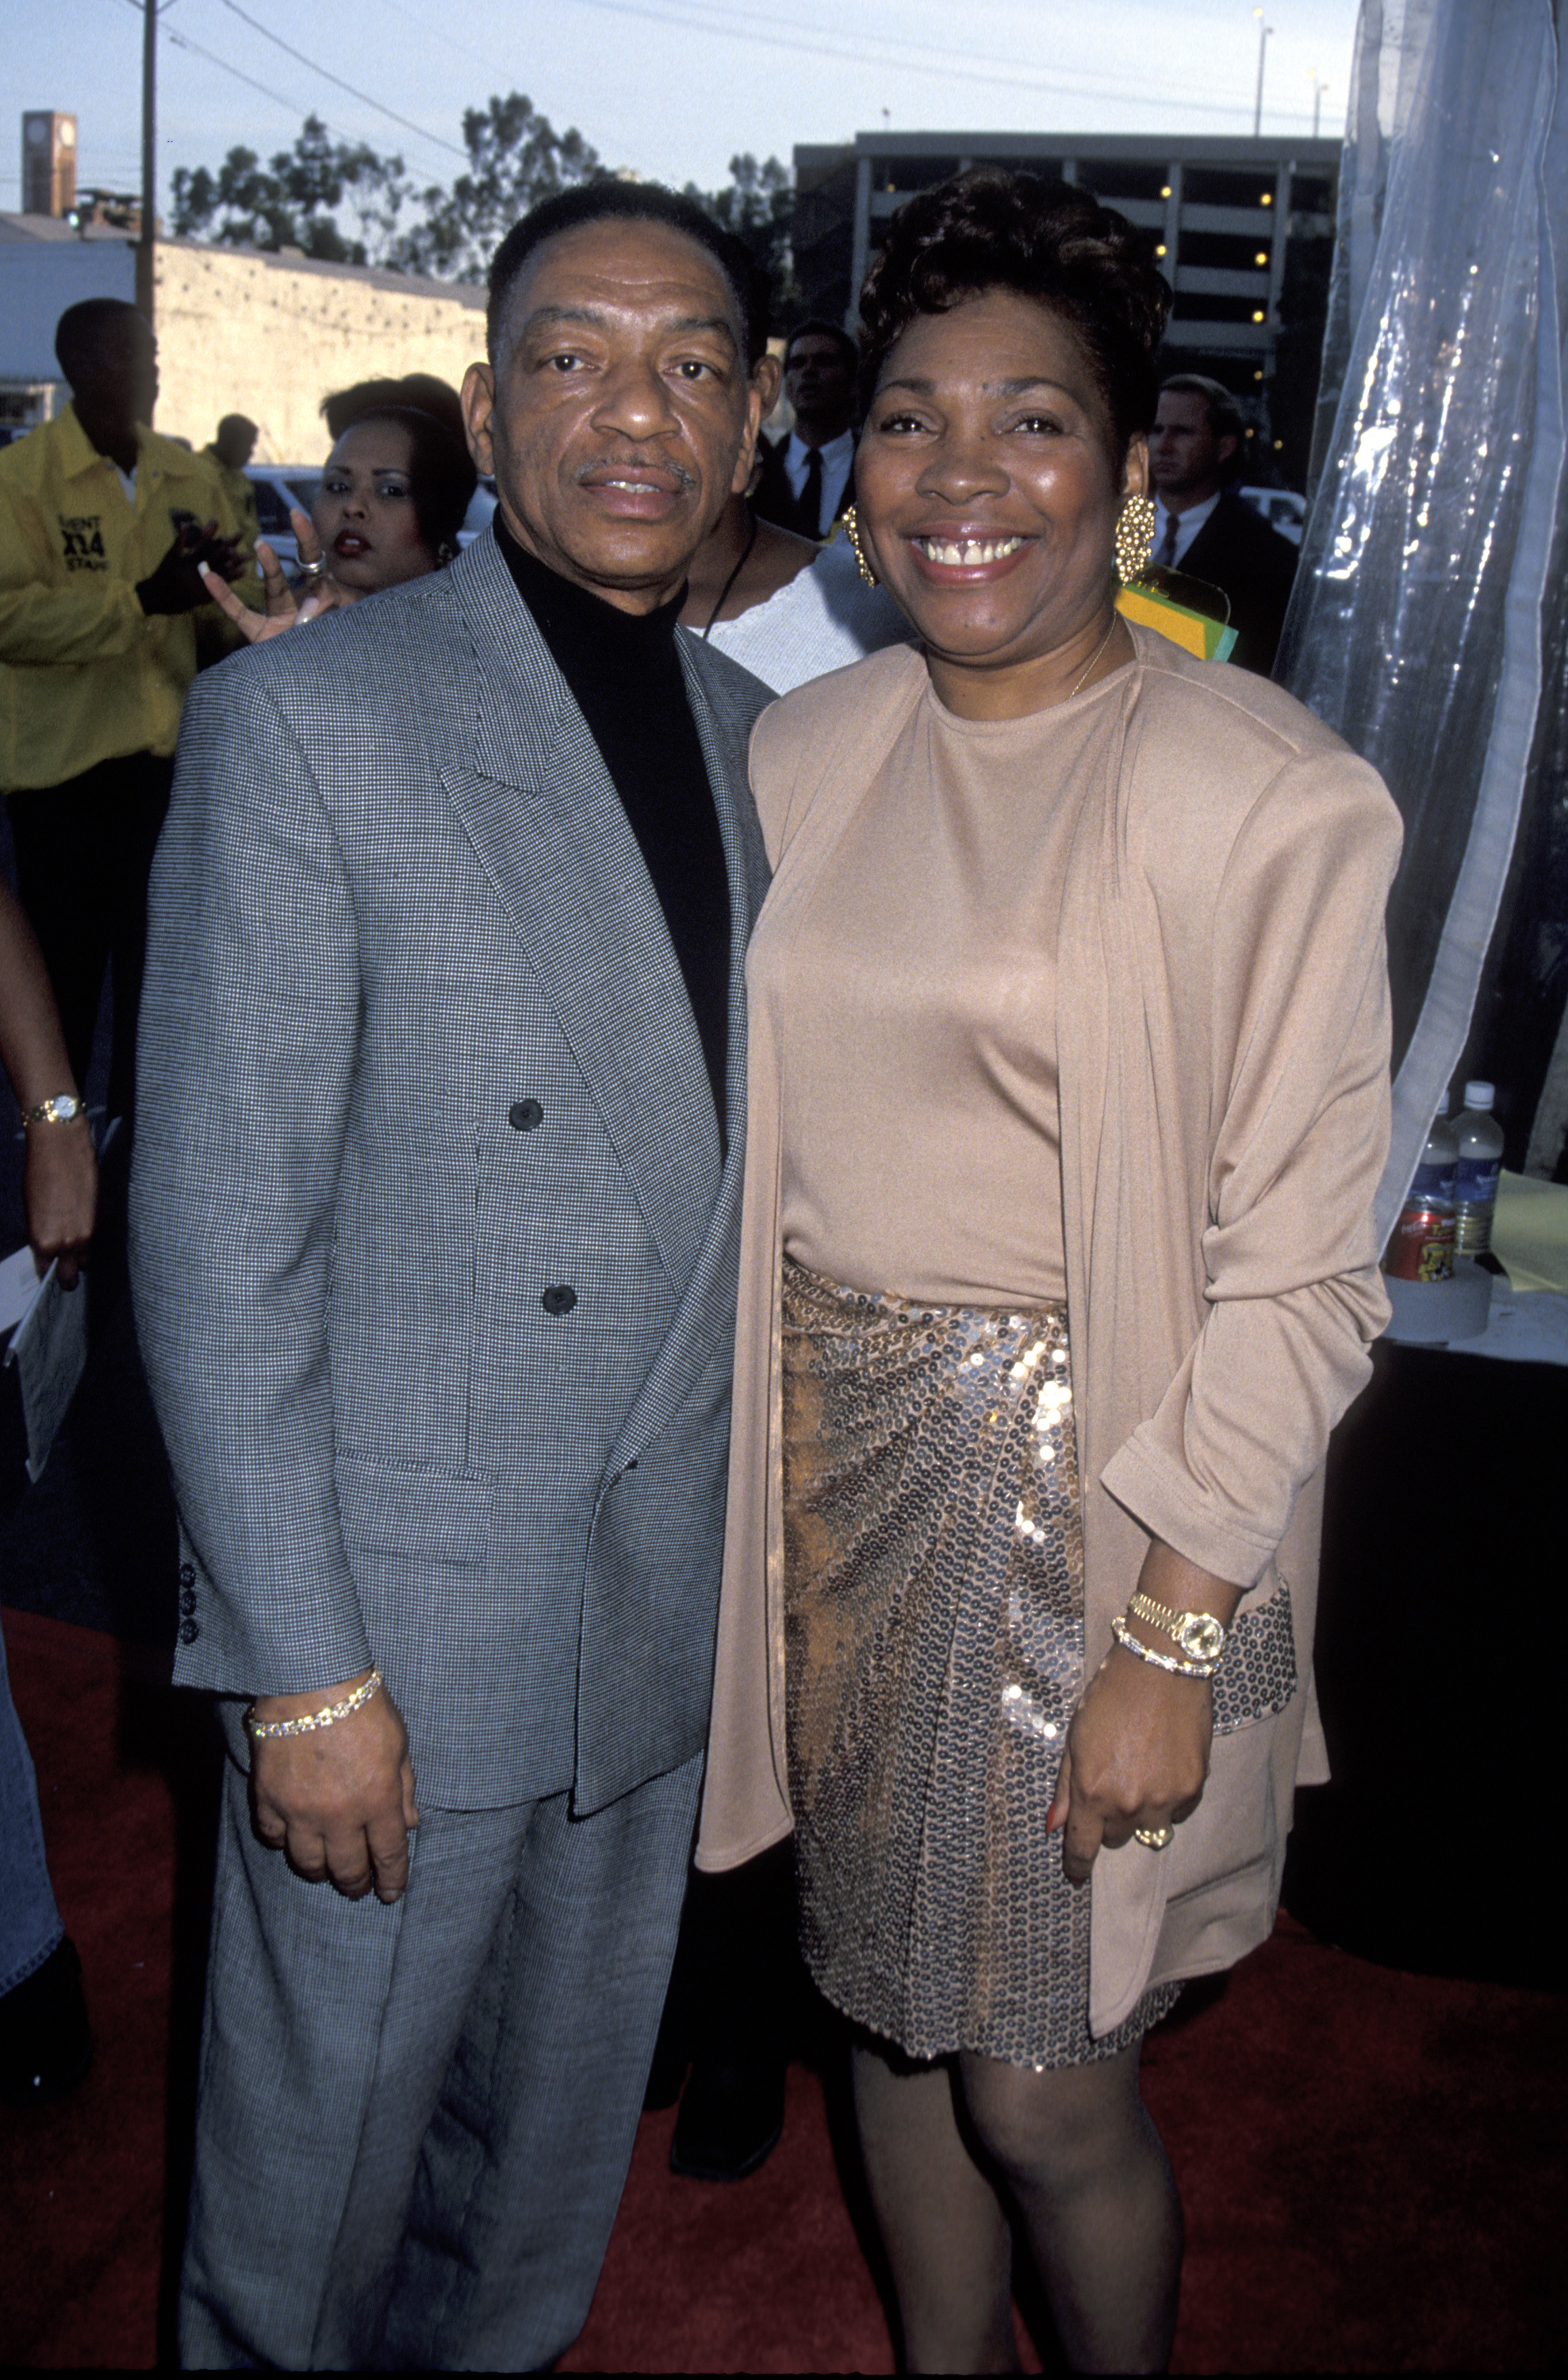 Vernon Lynch and Lillian Murphy during 7th Annual Soul Train Music Awards at Shrine Auditorium in Los Angeles, California on March 9, 1993 | Source: Getty Images